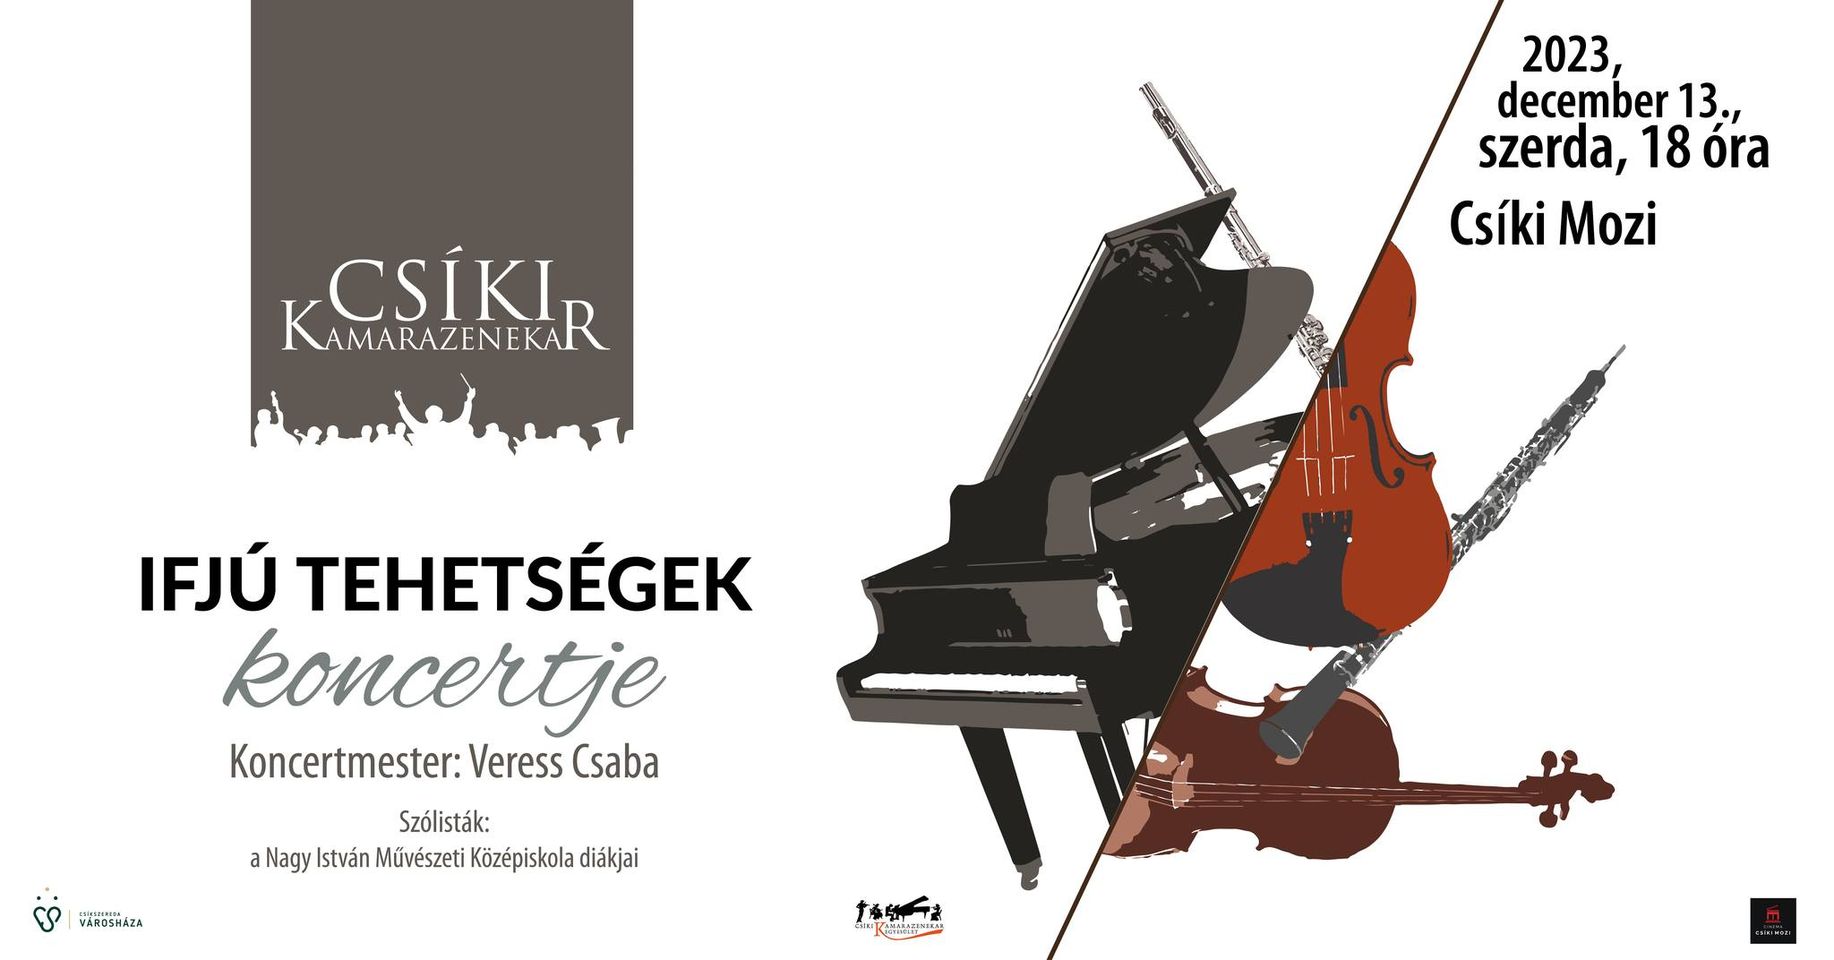 Concert of young talents